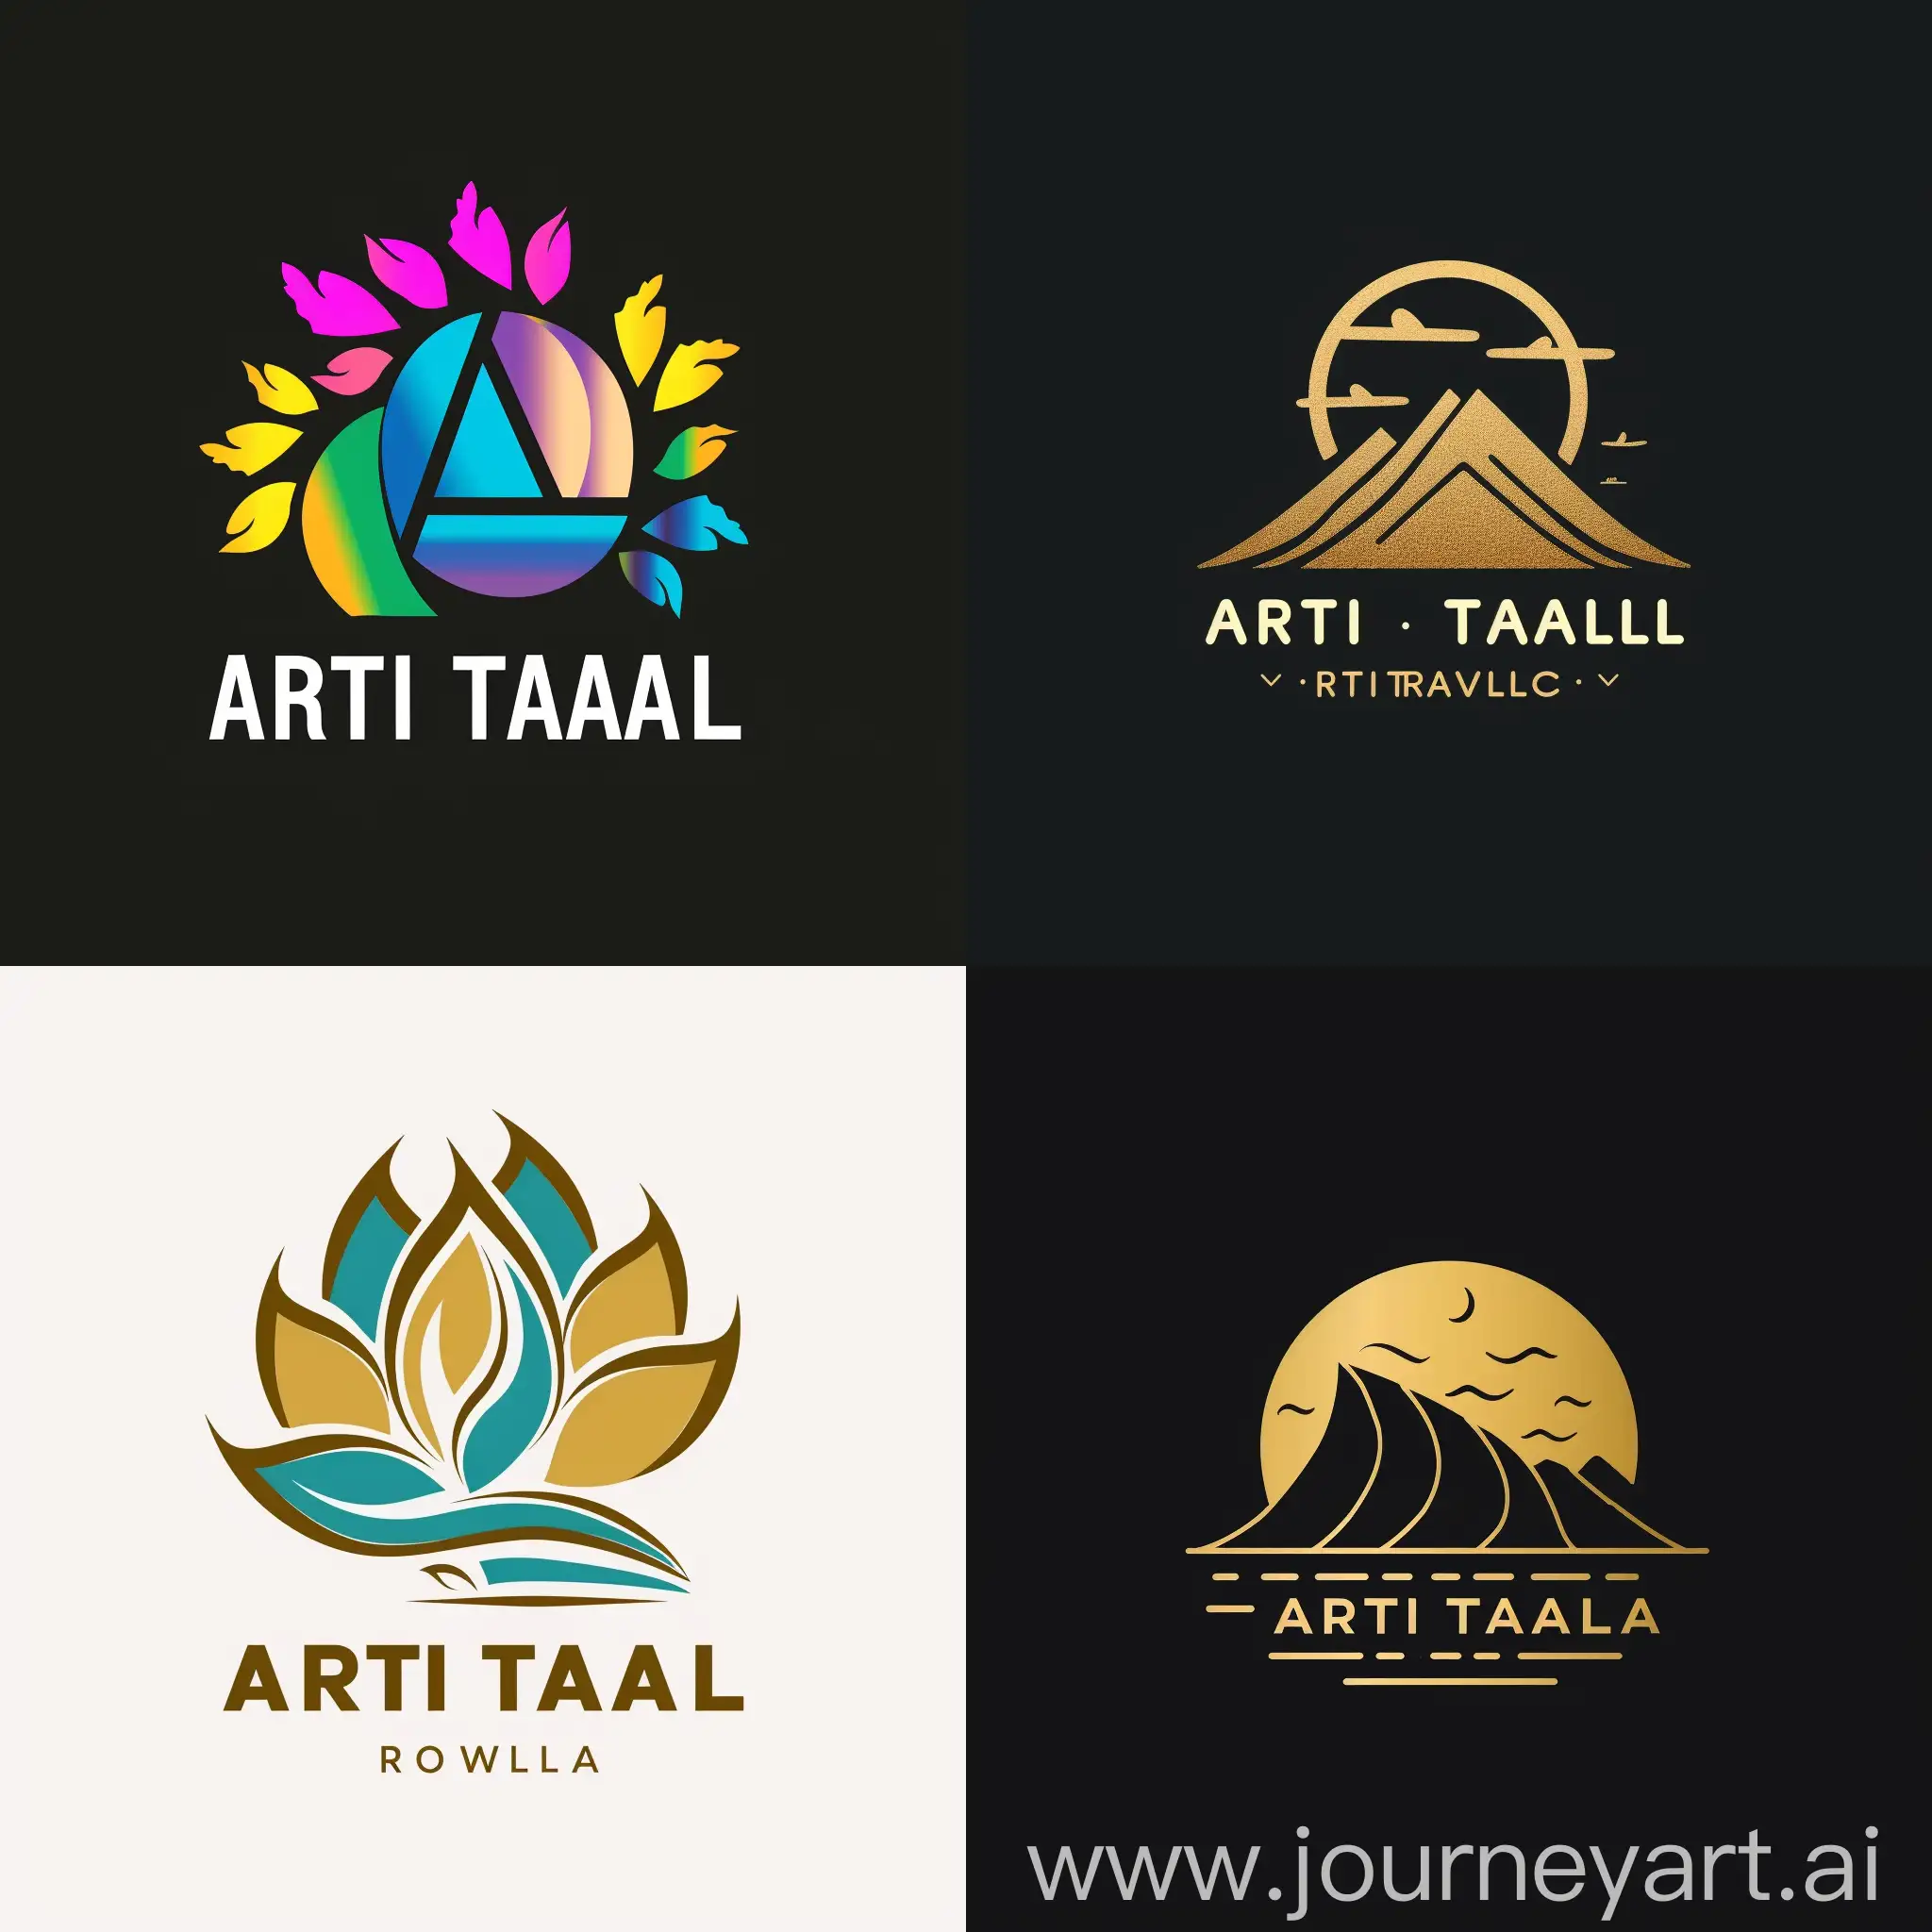 Arti-Travel-Agency-Logo-Design-with-Vibrant-Colors-and-Geometric-Shapes